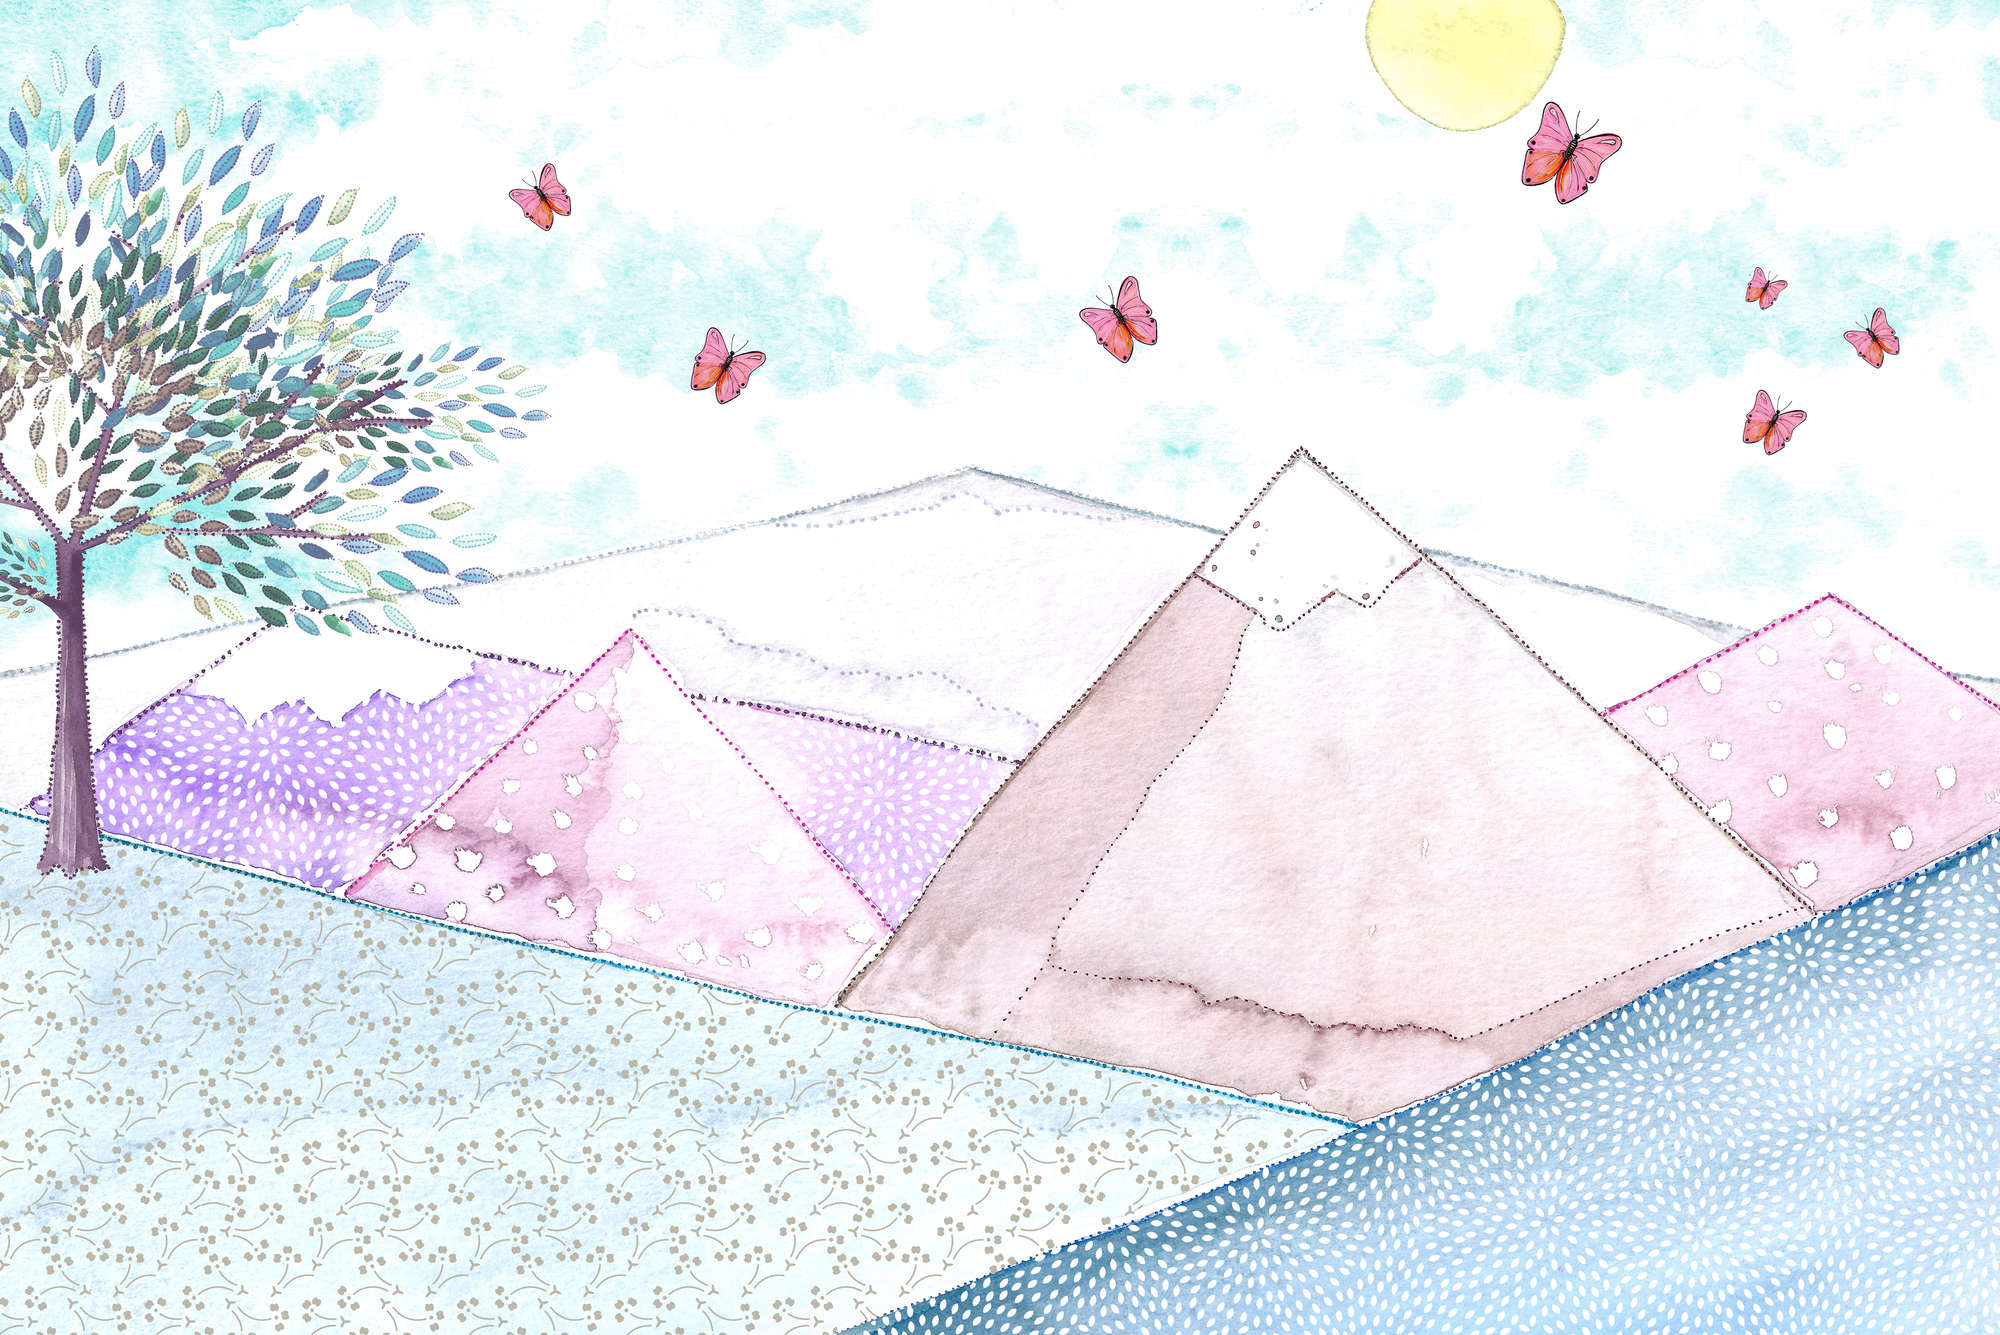             Children mural mountain landscape drawing on textured non-woven
        